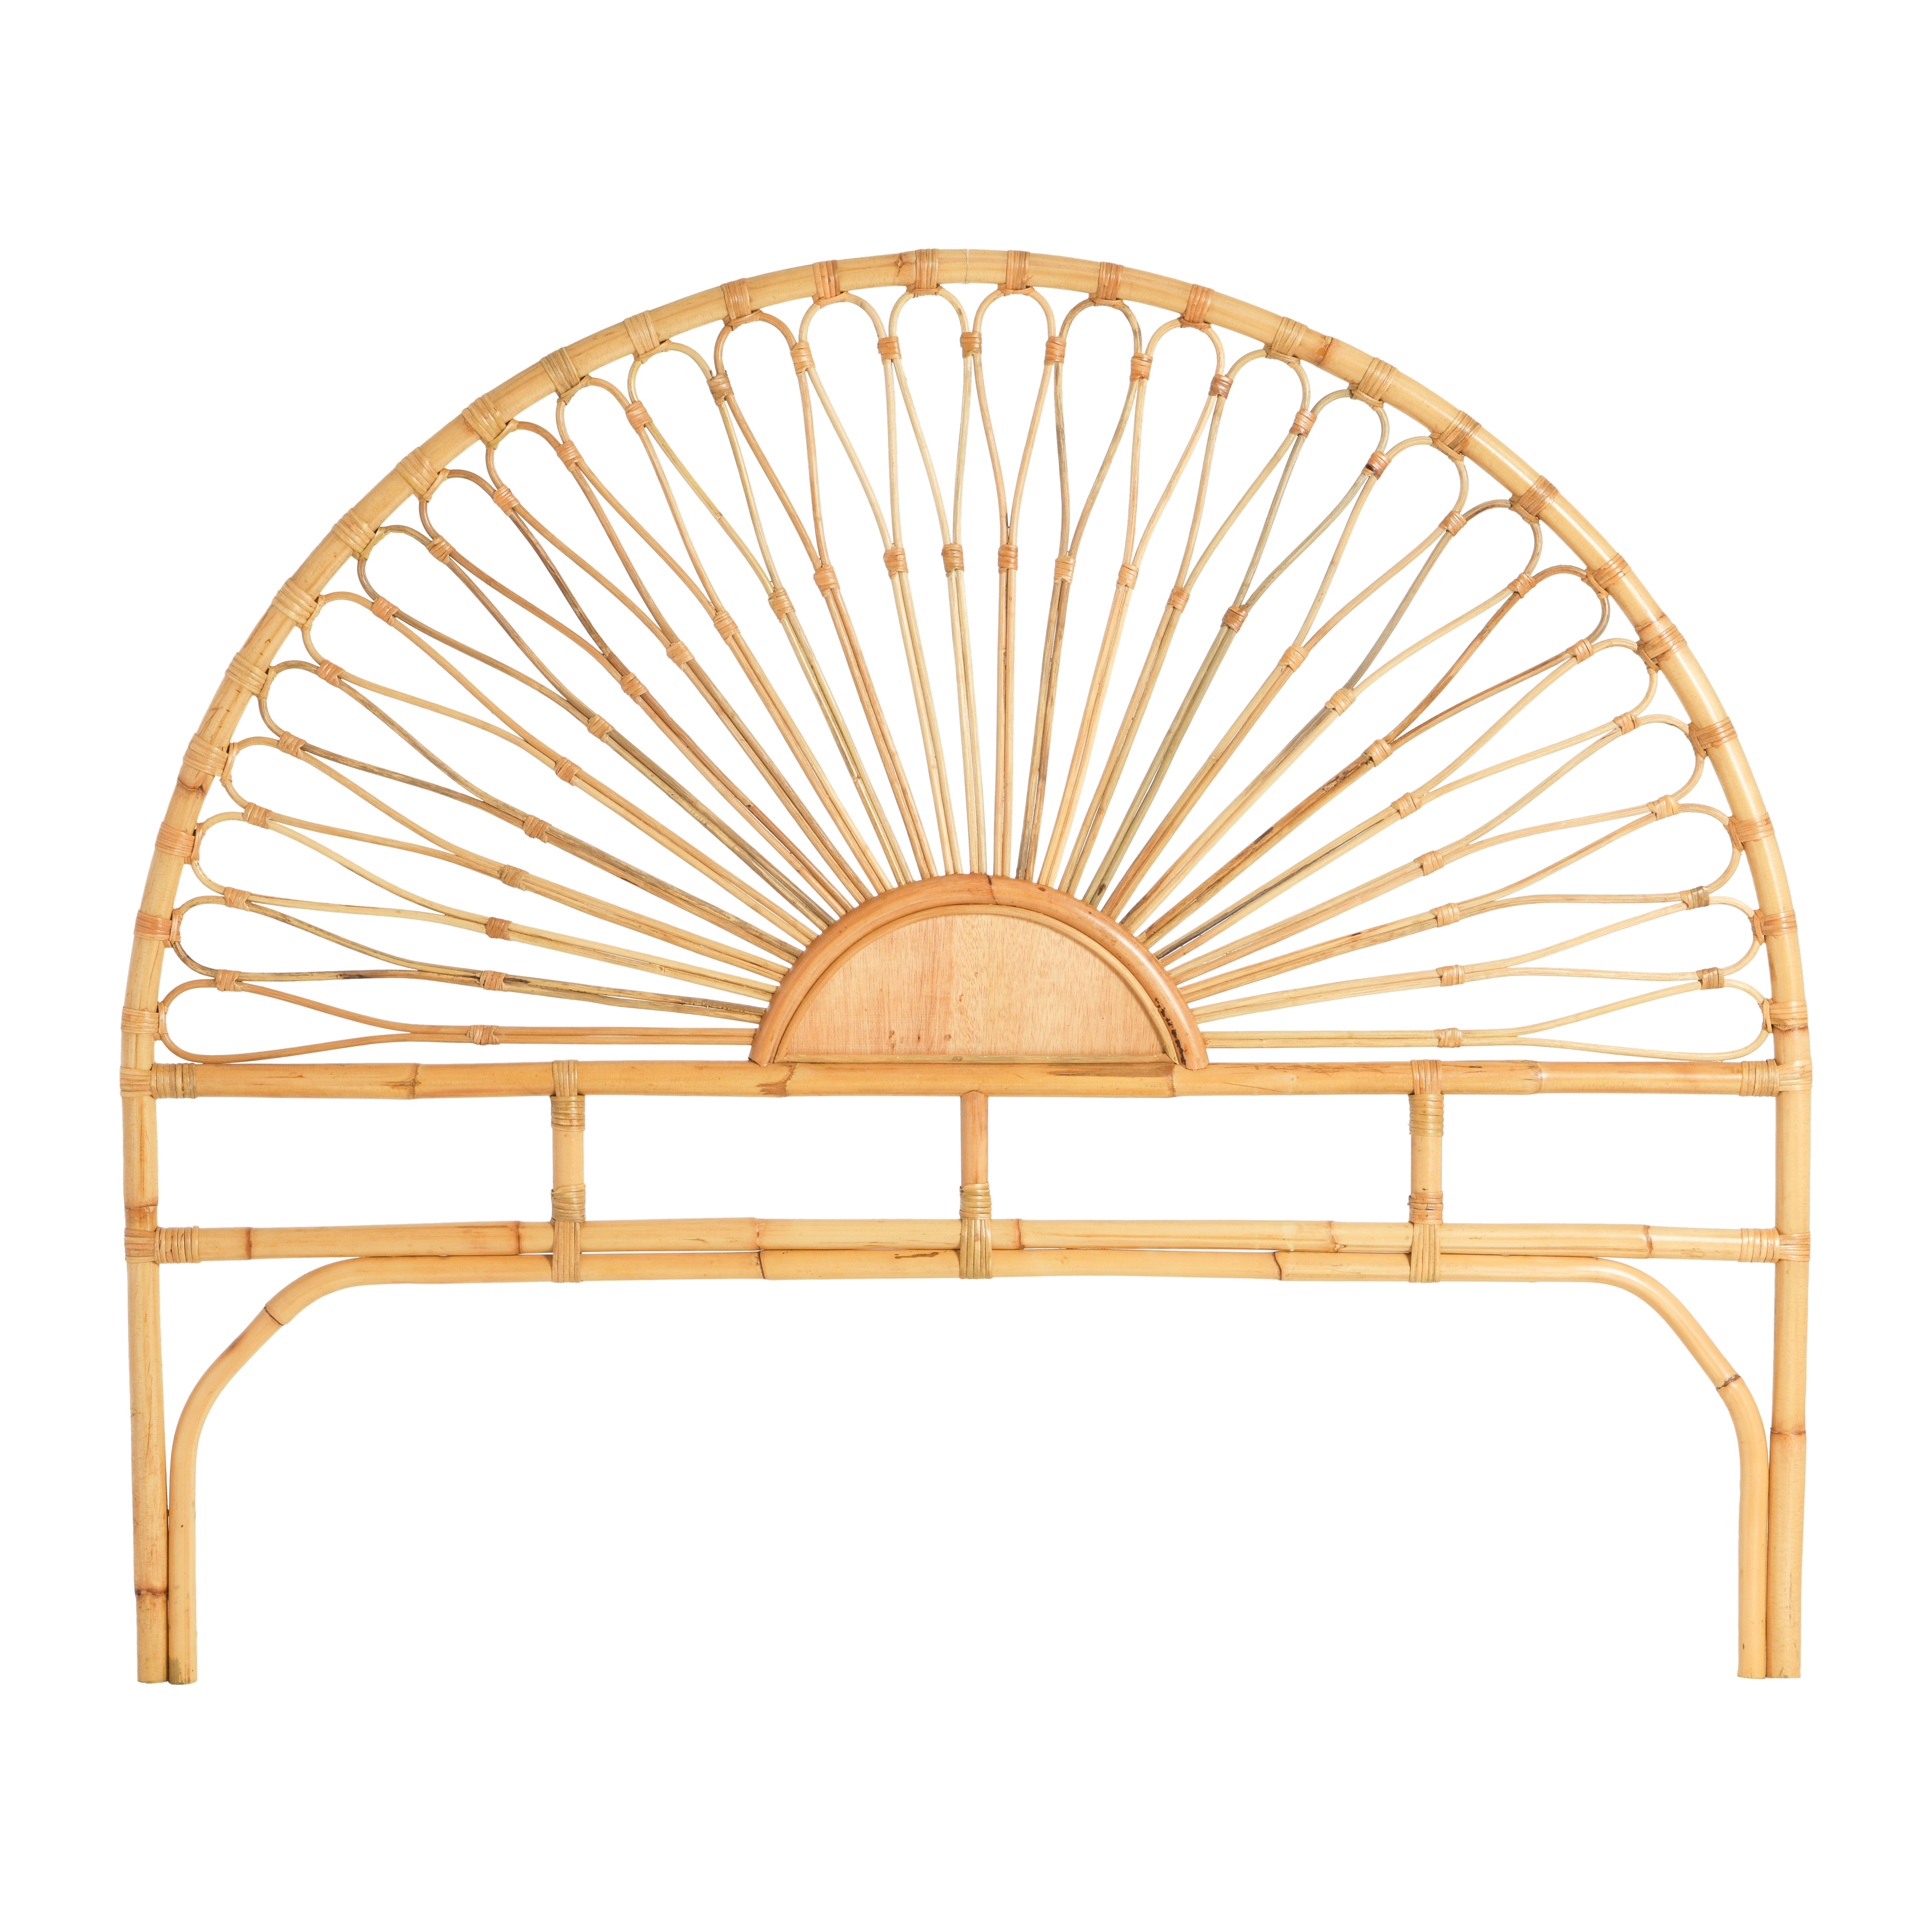 Rattan Headboard with Sunrise Design, King-Size - Nomad Home